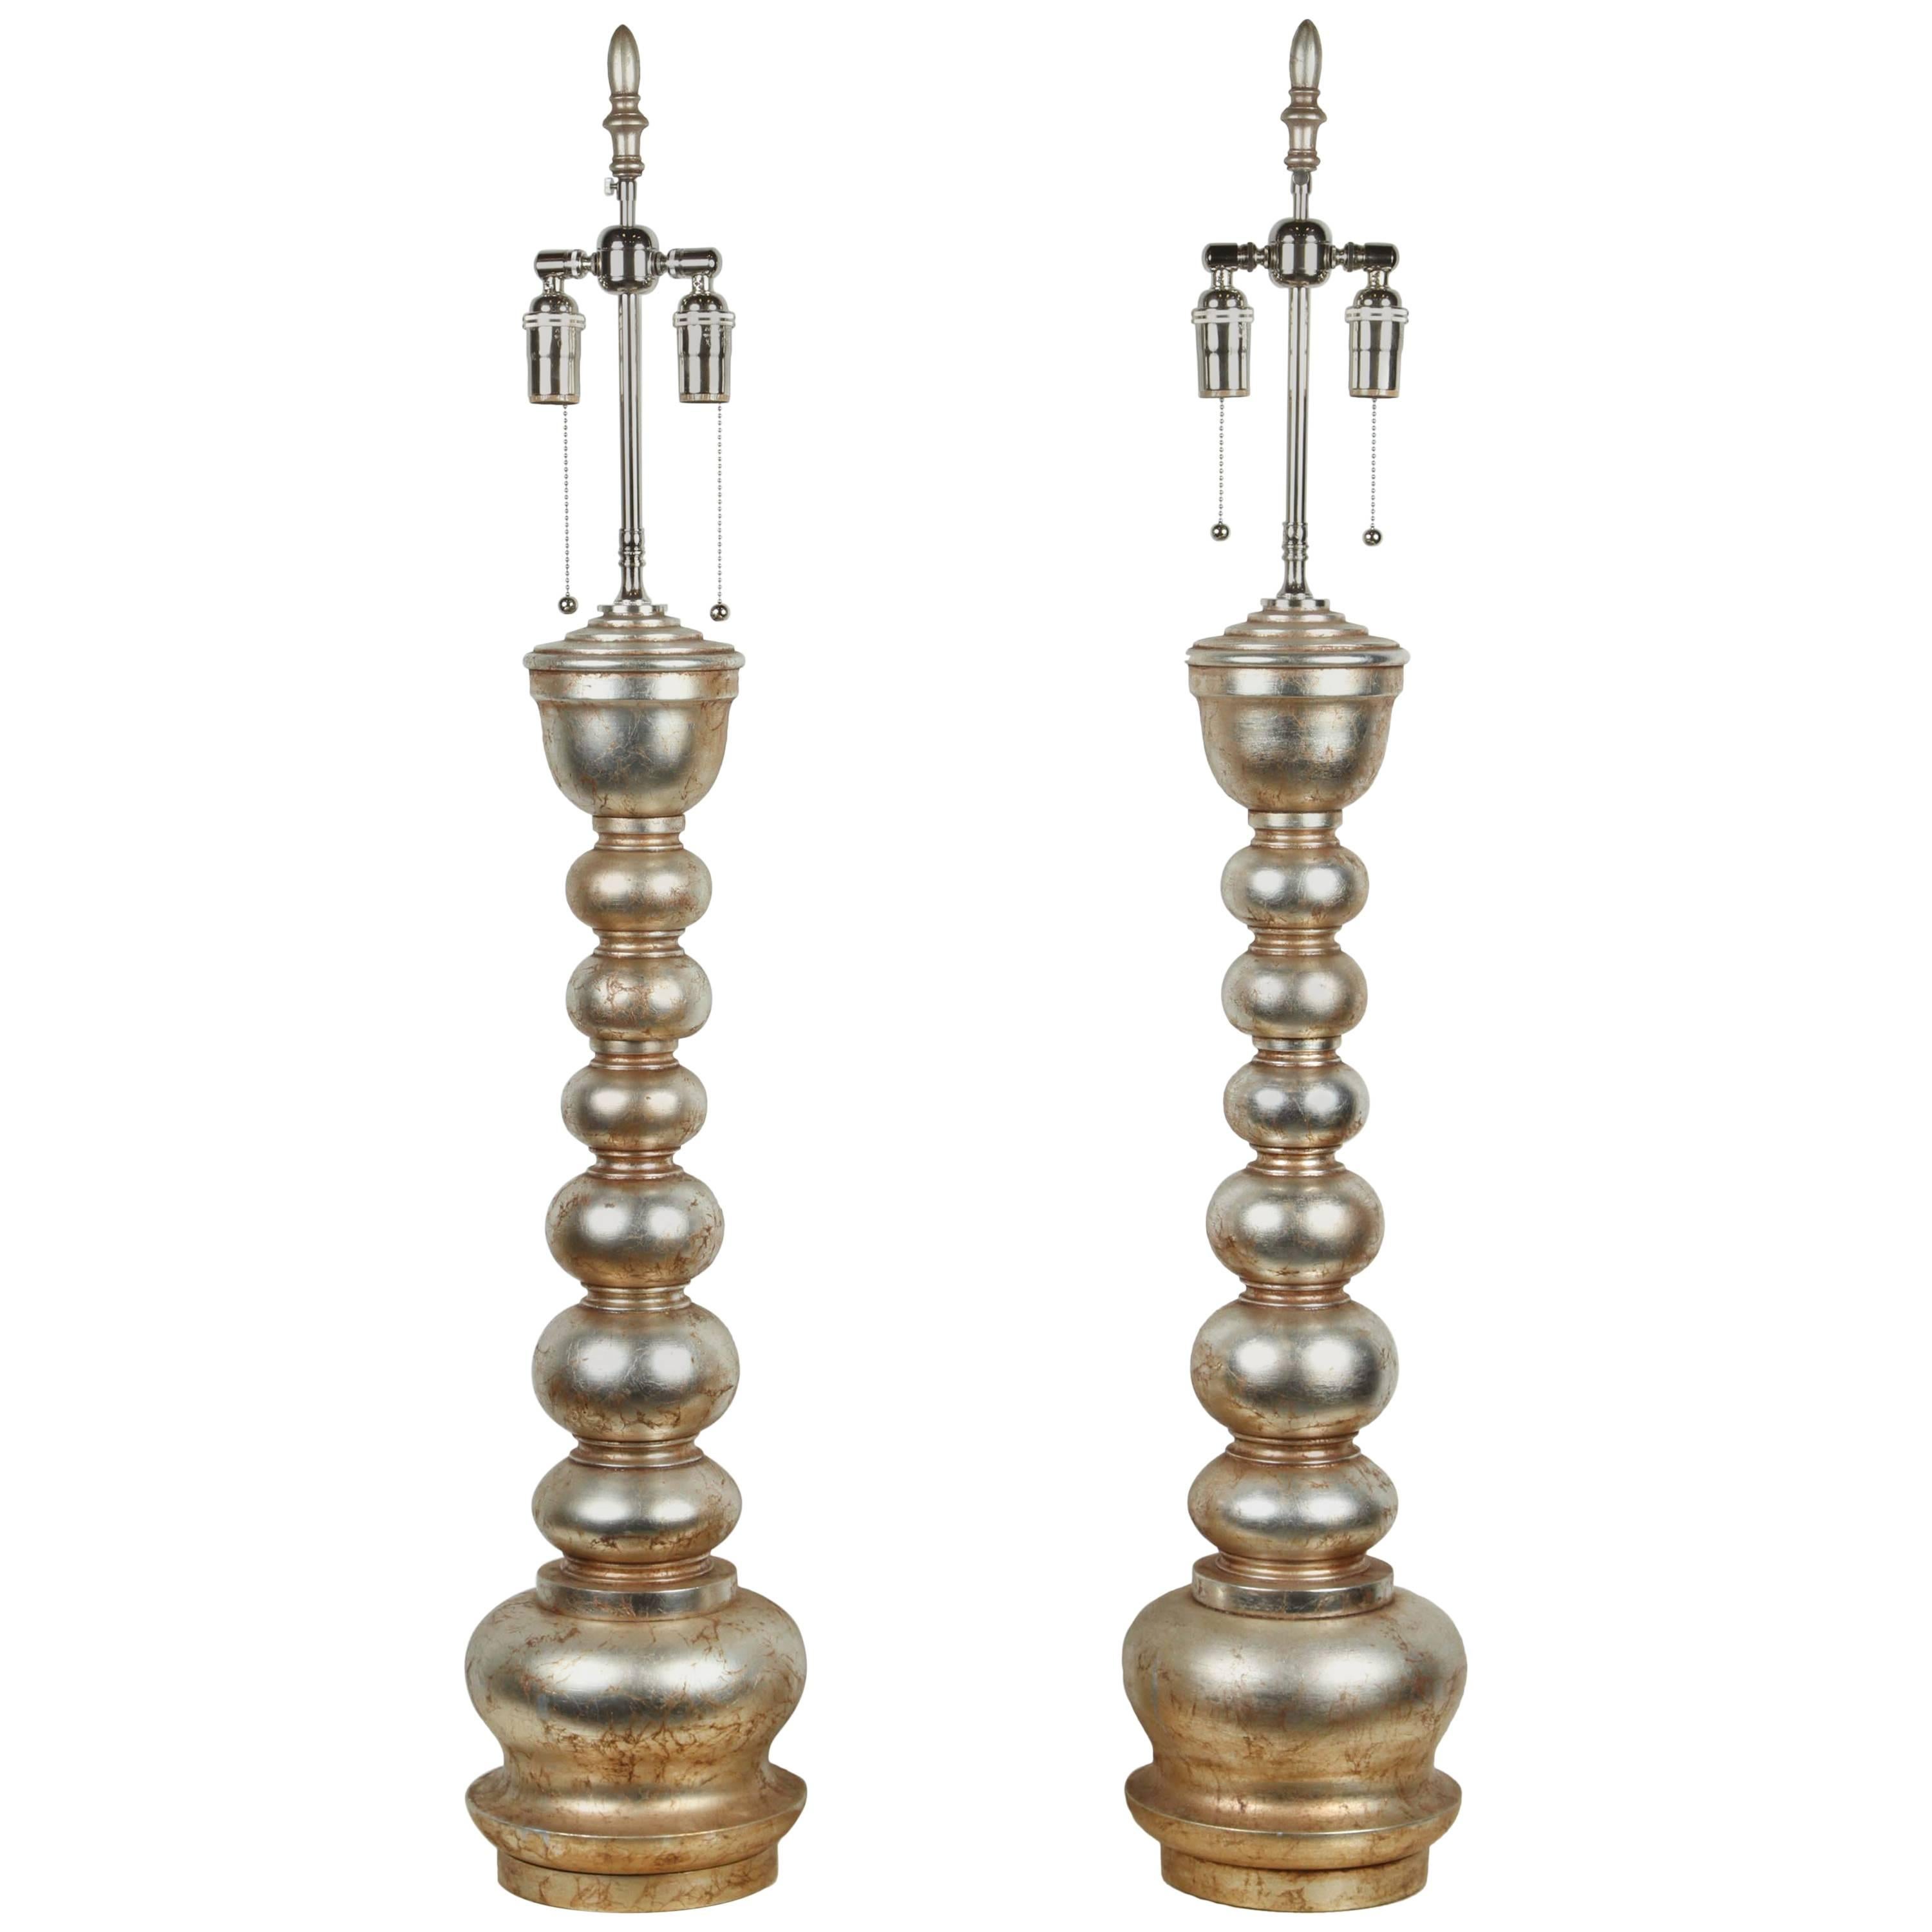 Pair of Magificent Pagoda Style Lamps by James Mont